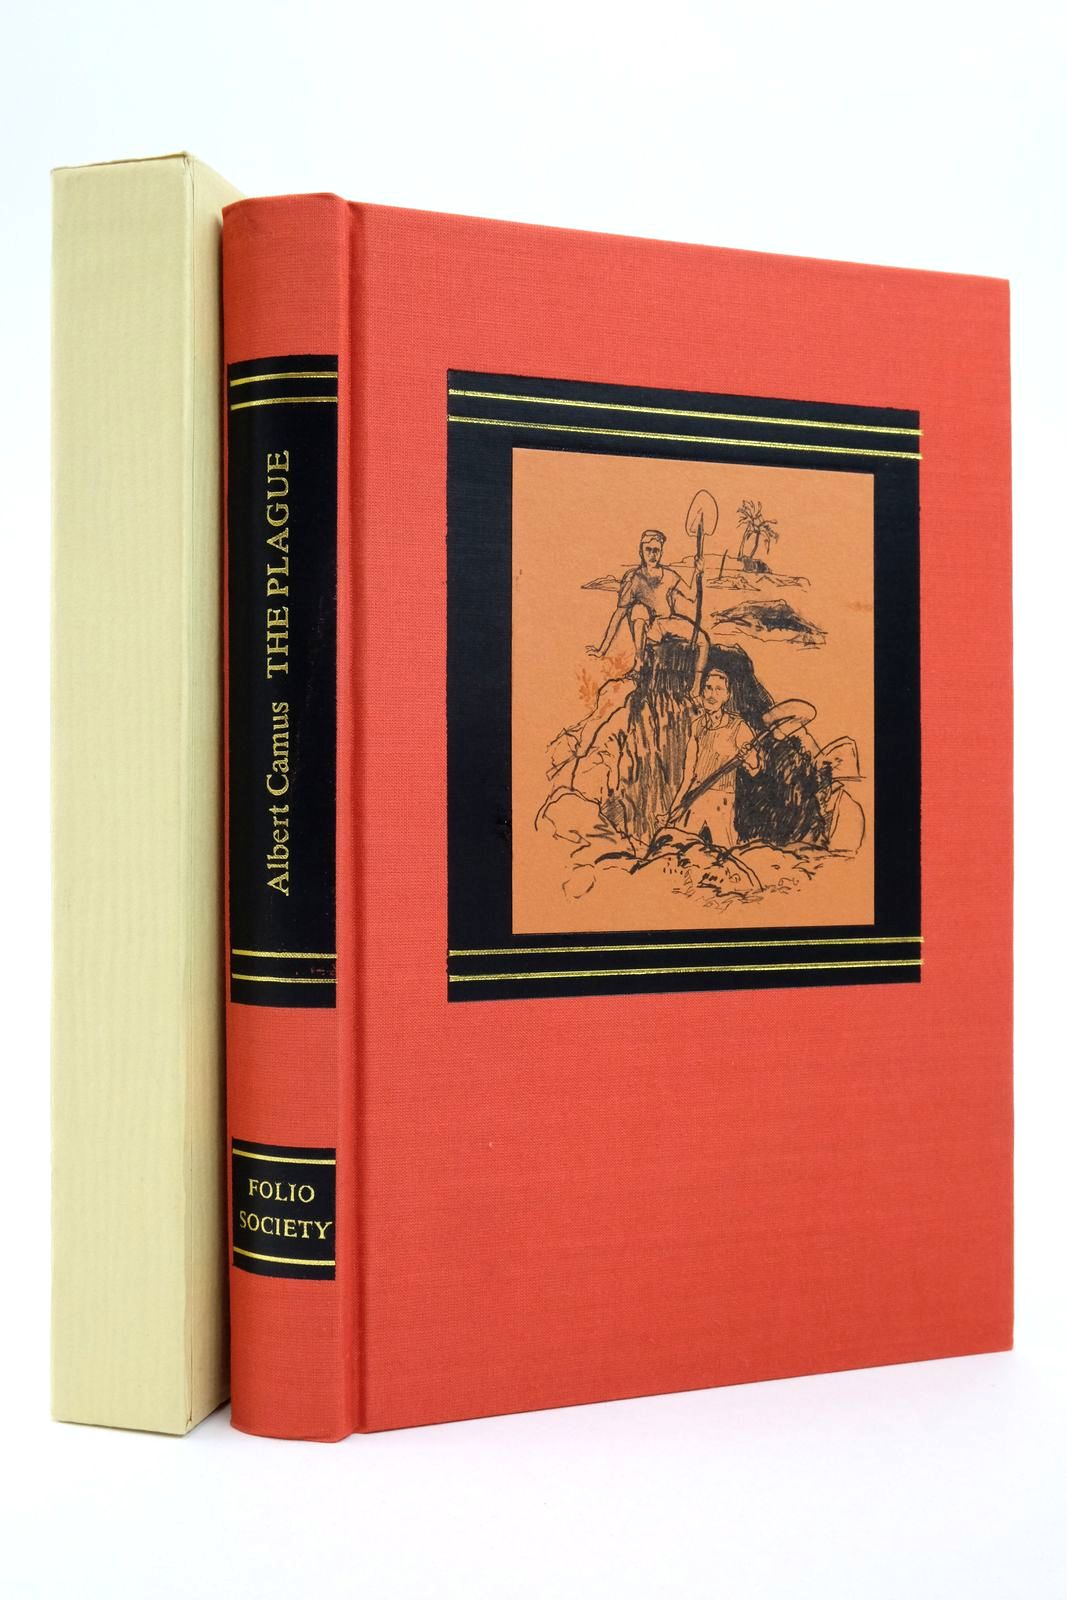 Photo of THE PLAGUE written by Camus, Albert
Parker, Derek illustrated by Kitson, Linda published by Folio Society (STOCK CODE: 2138402)  for sale by Stella & Rose's Books